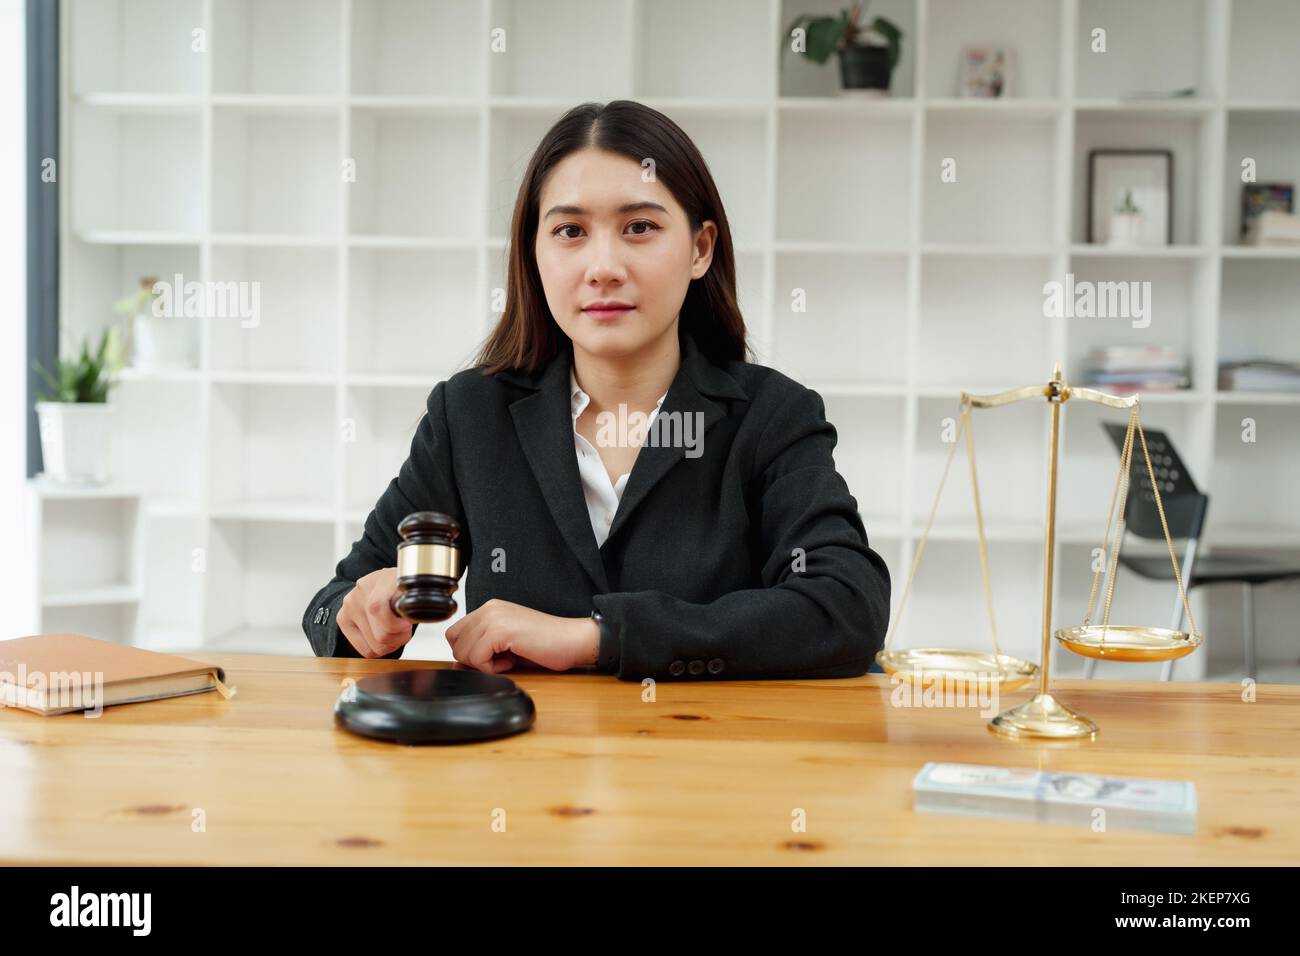 Corruption concept, law, female lawyer holding a gavel showing justice during work Stock Photo